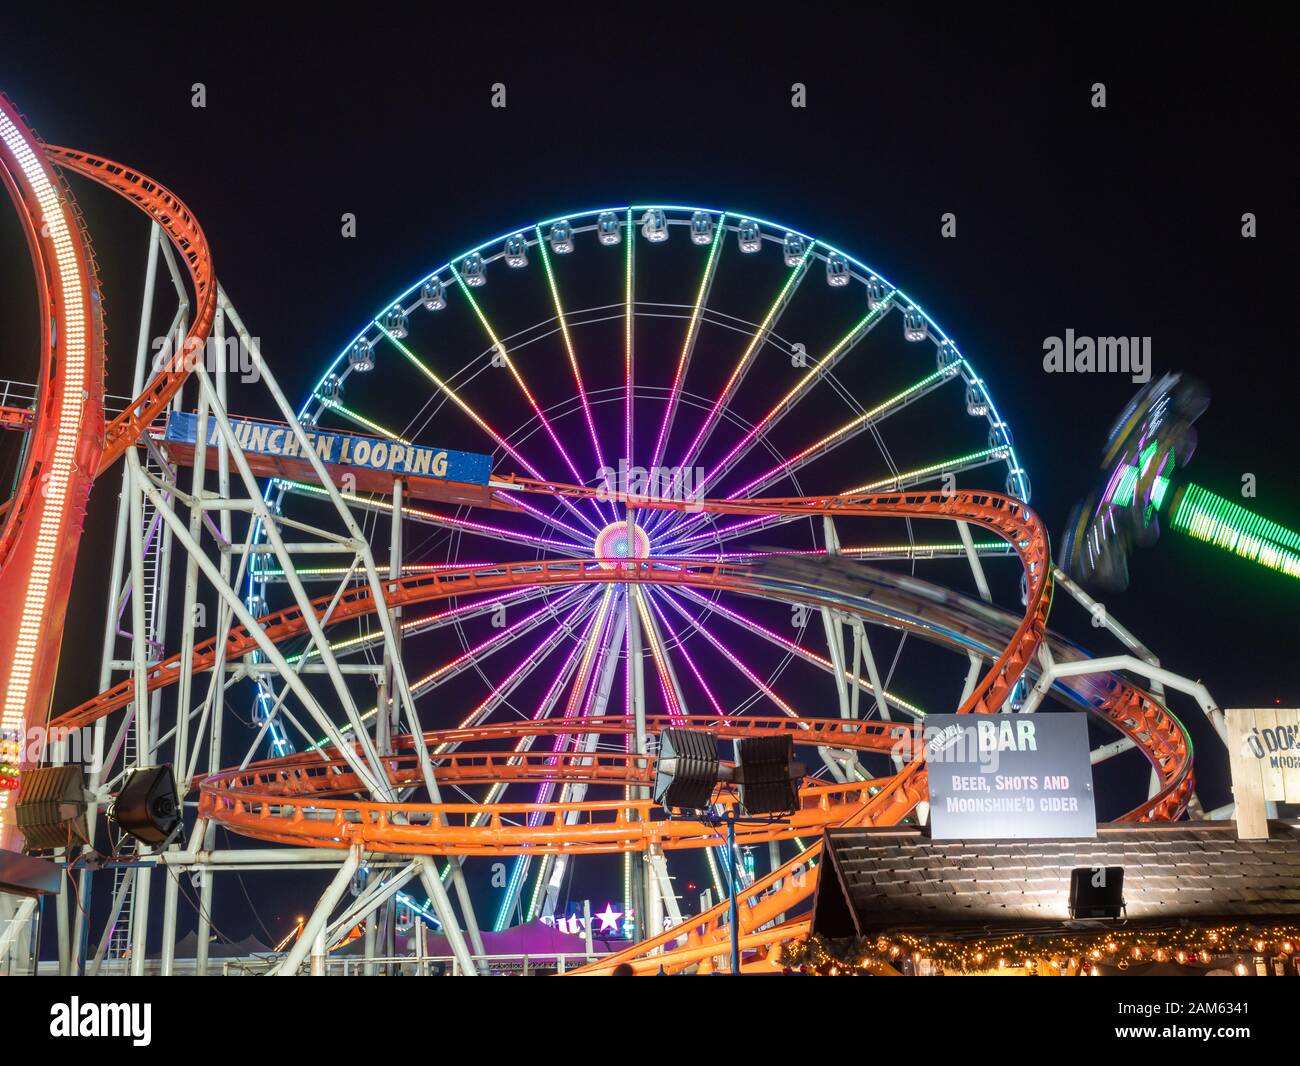 London, England, UK - December 28, 2019: Front view of Ferris wheel and rollercoaster at night in winter wonderland in Christmas holiday Stock Photo